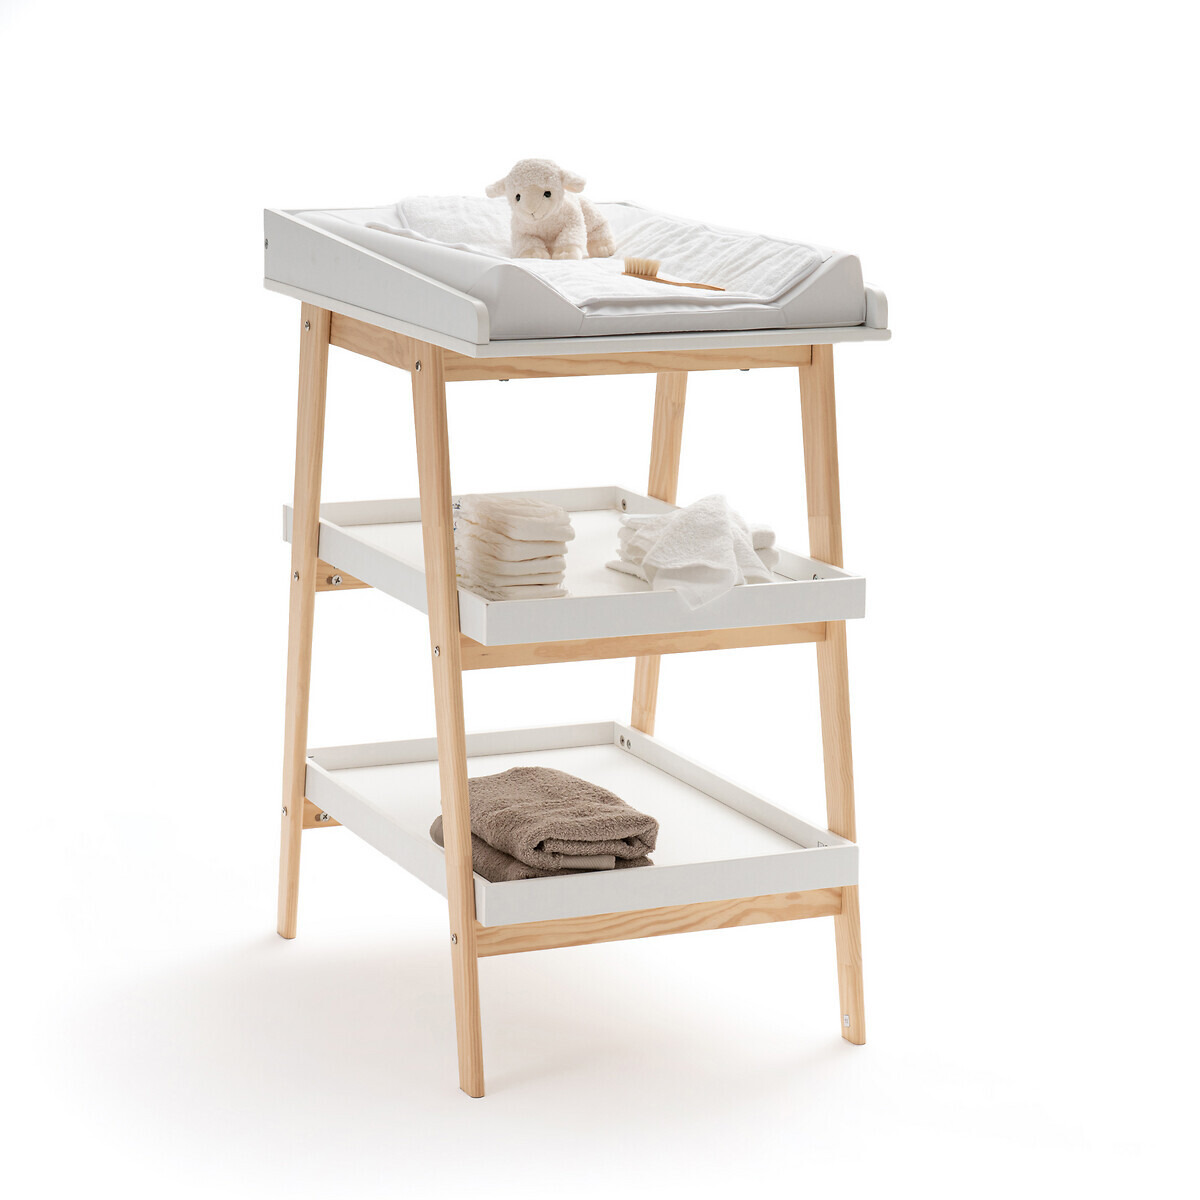 Oréade Changing Table - image 1